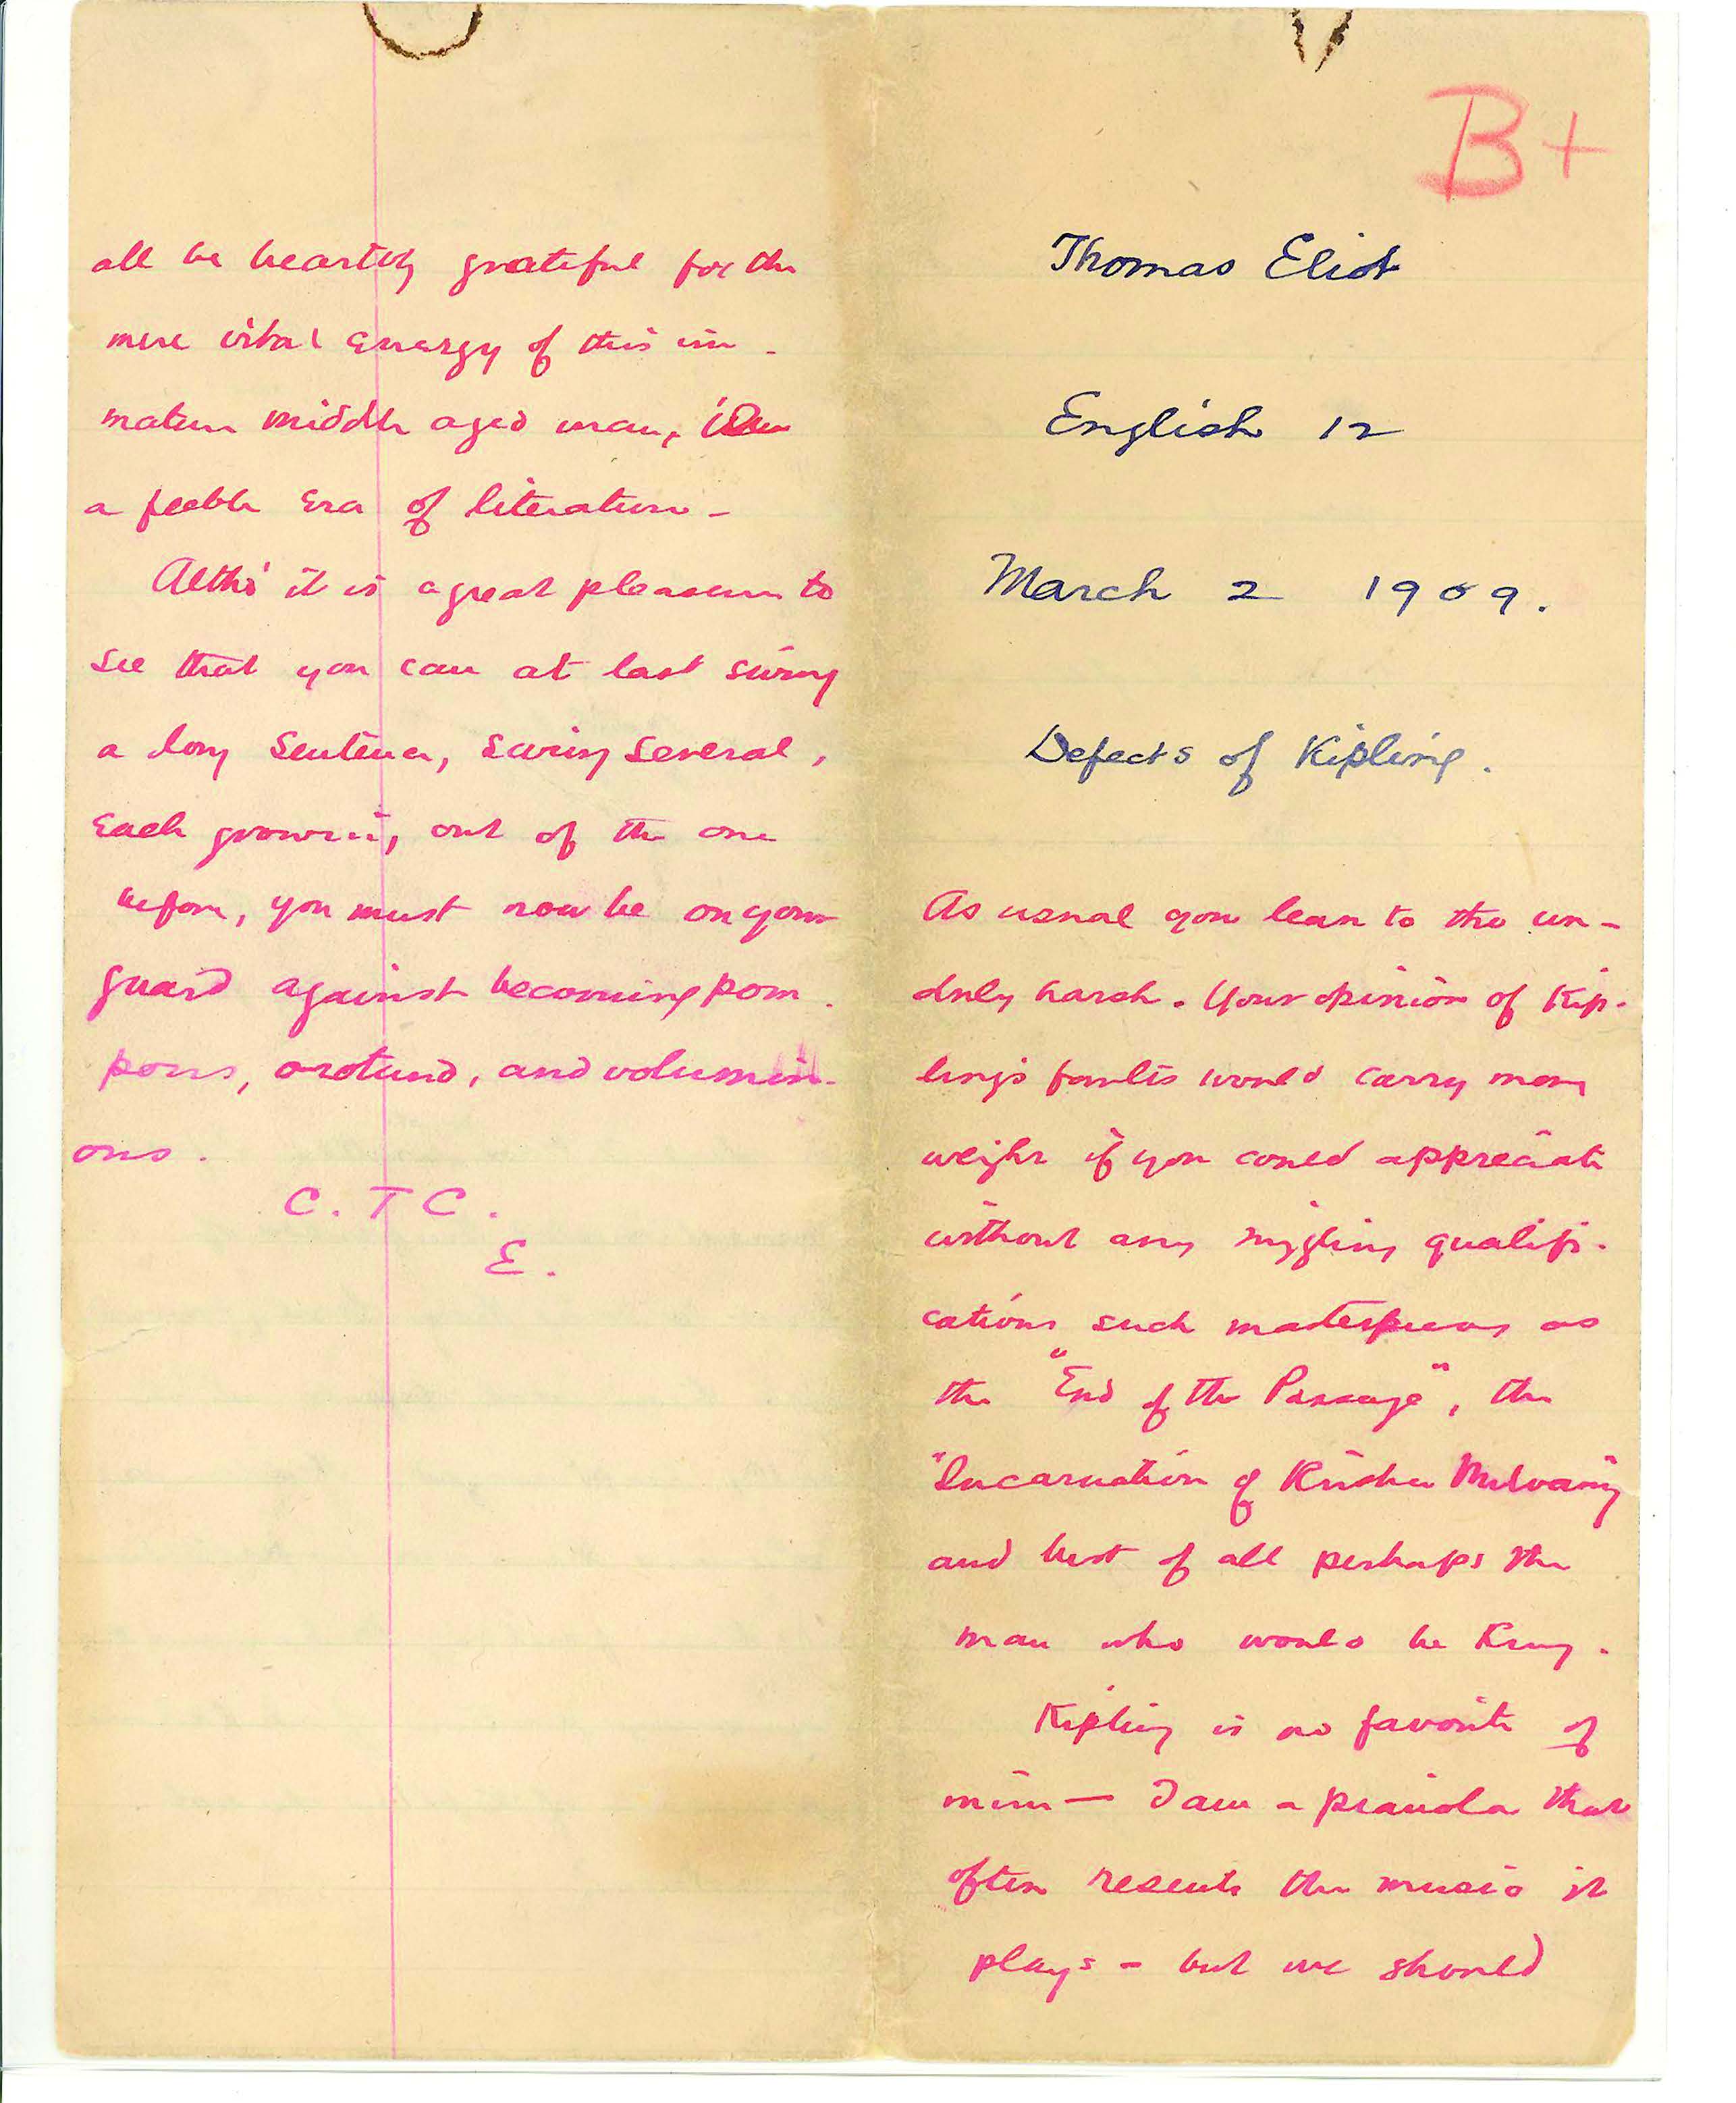 6. Facsimile of last page of “The Defects of Kipling”